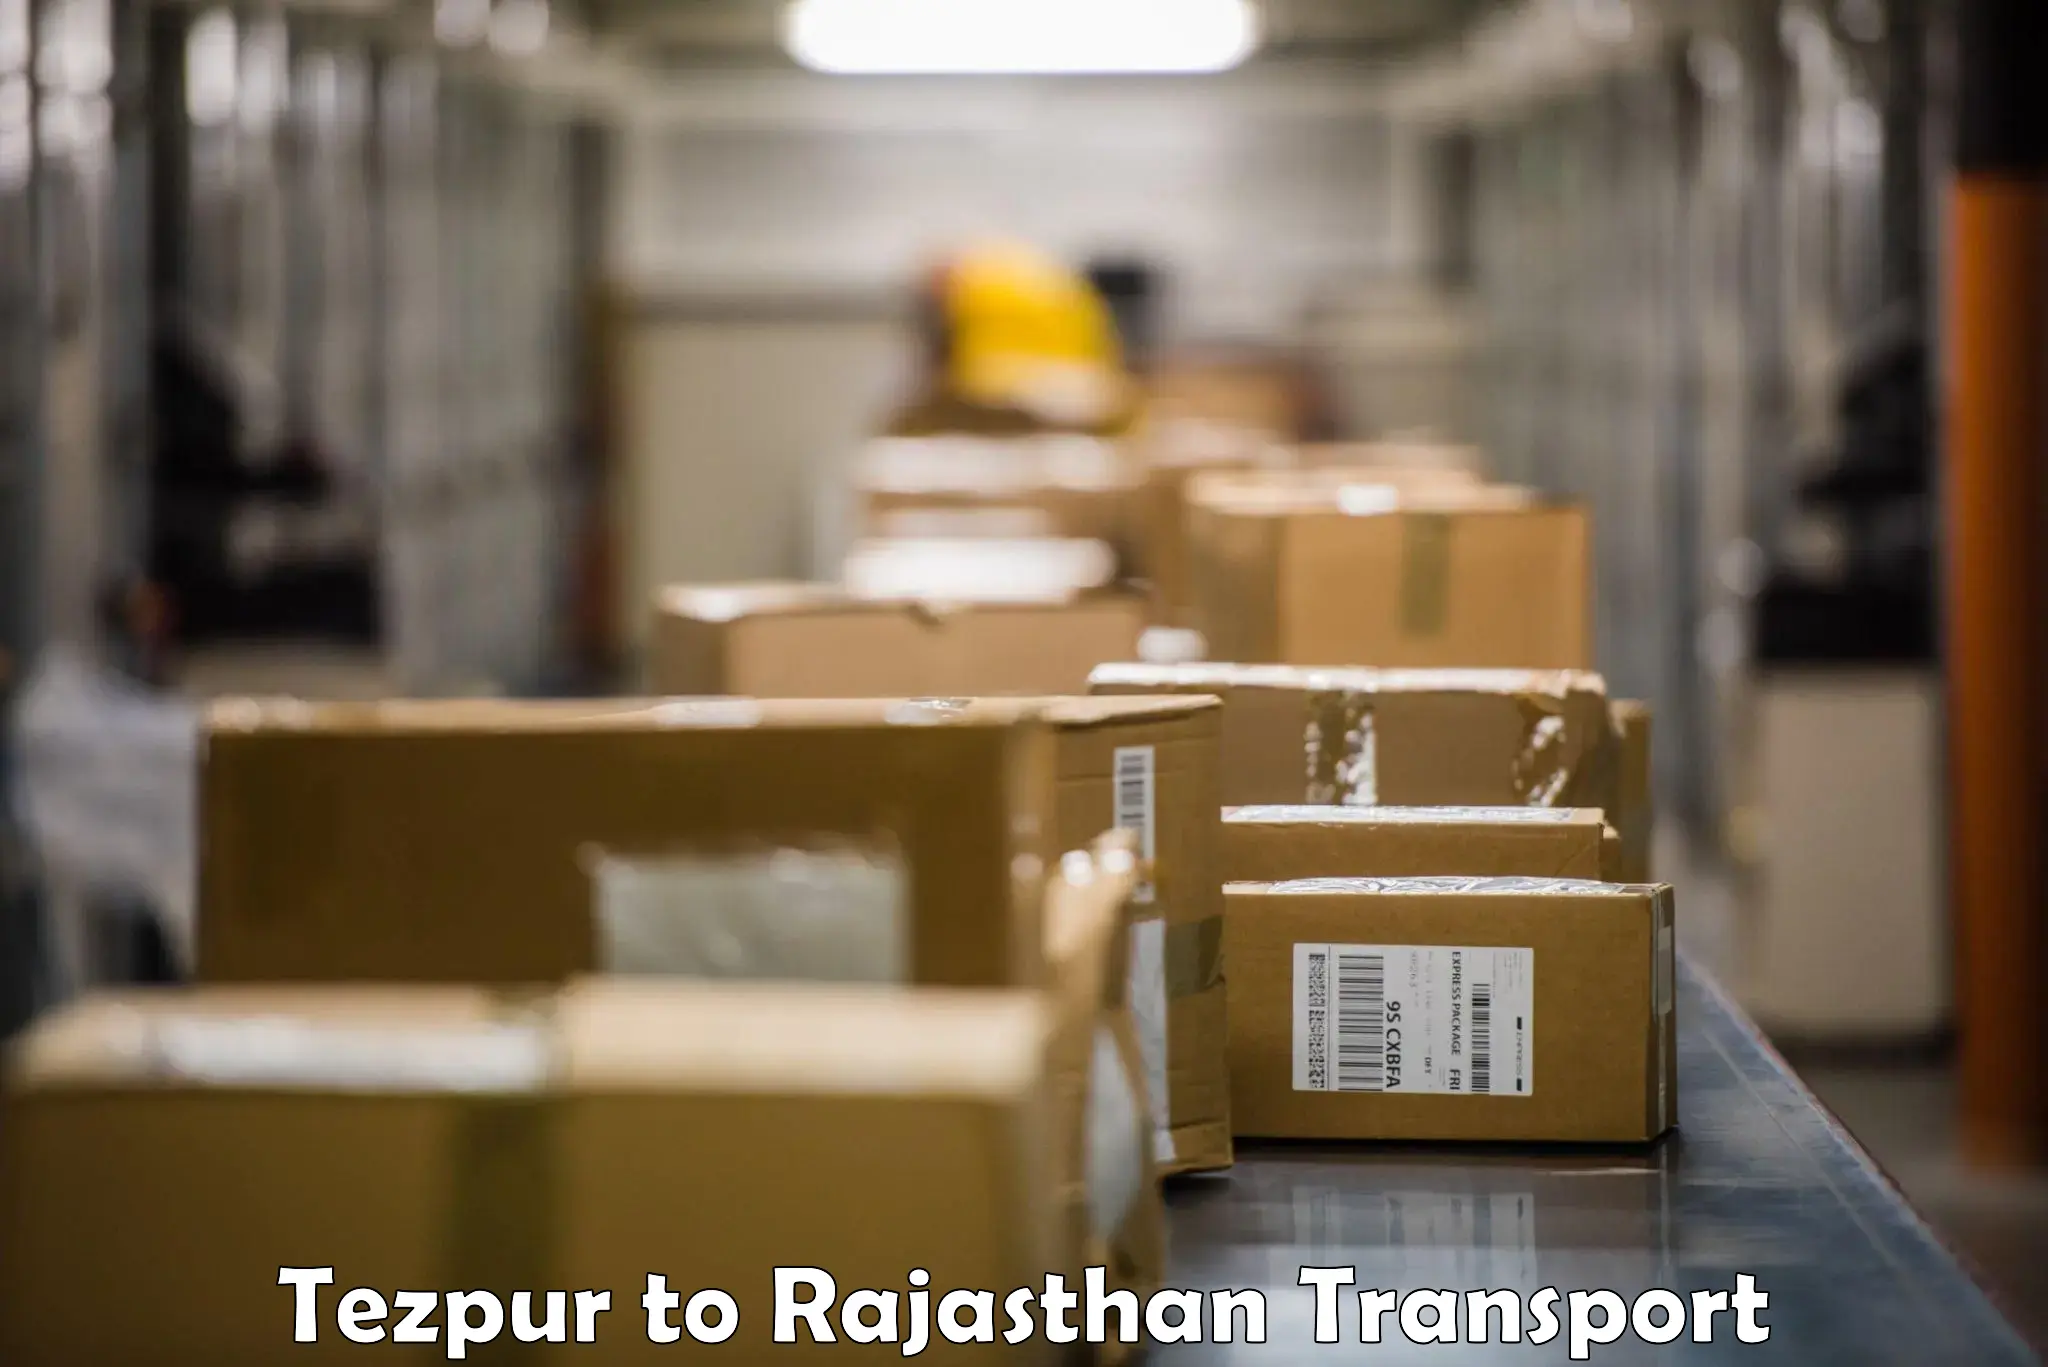 Daily parcel service transport in Tezpur to Pokhran